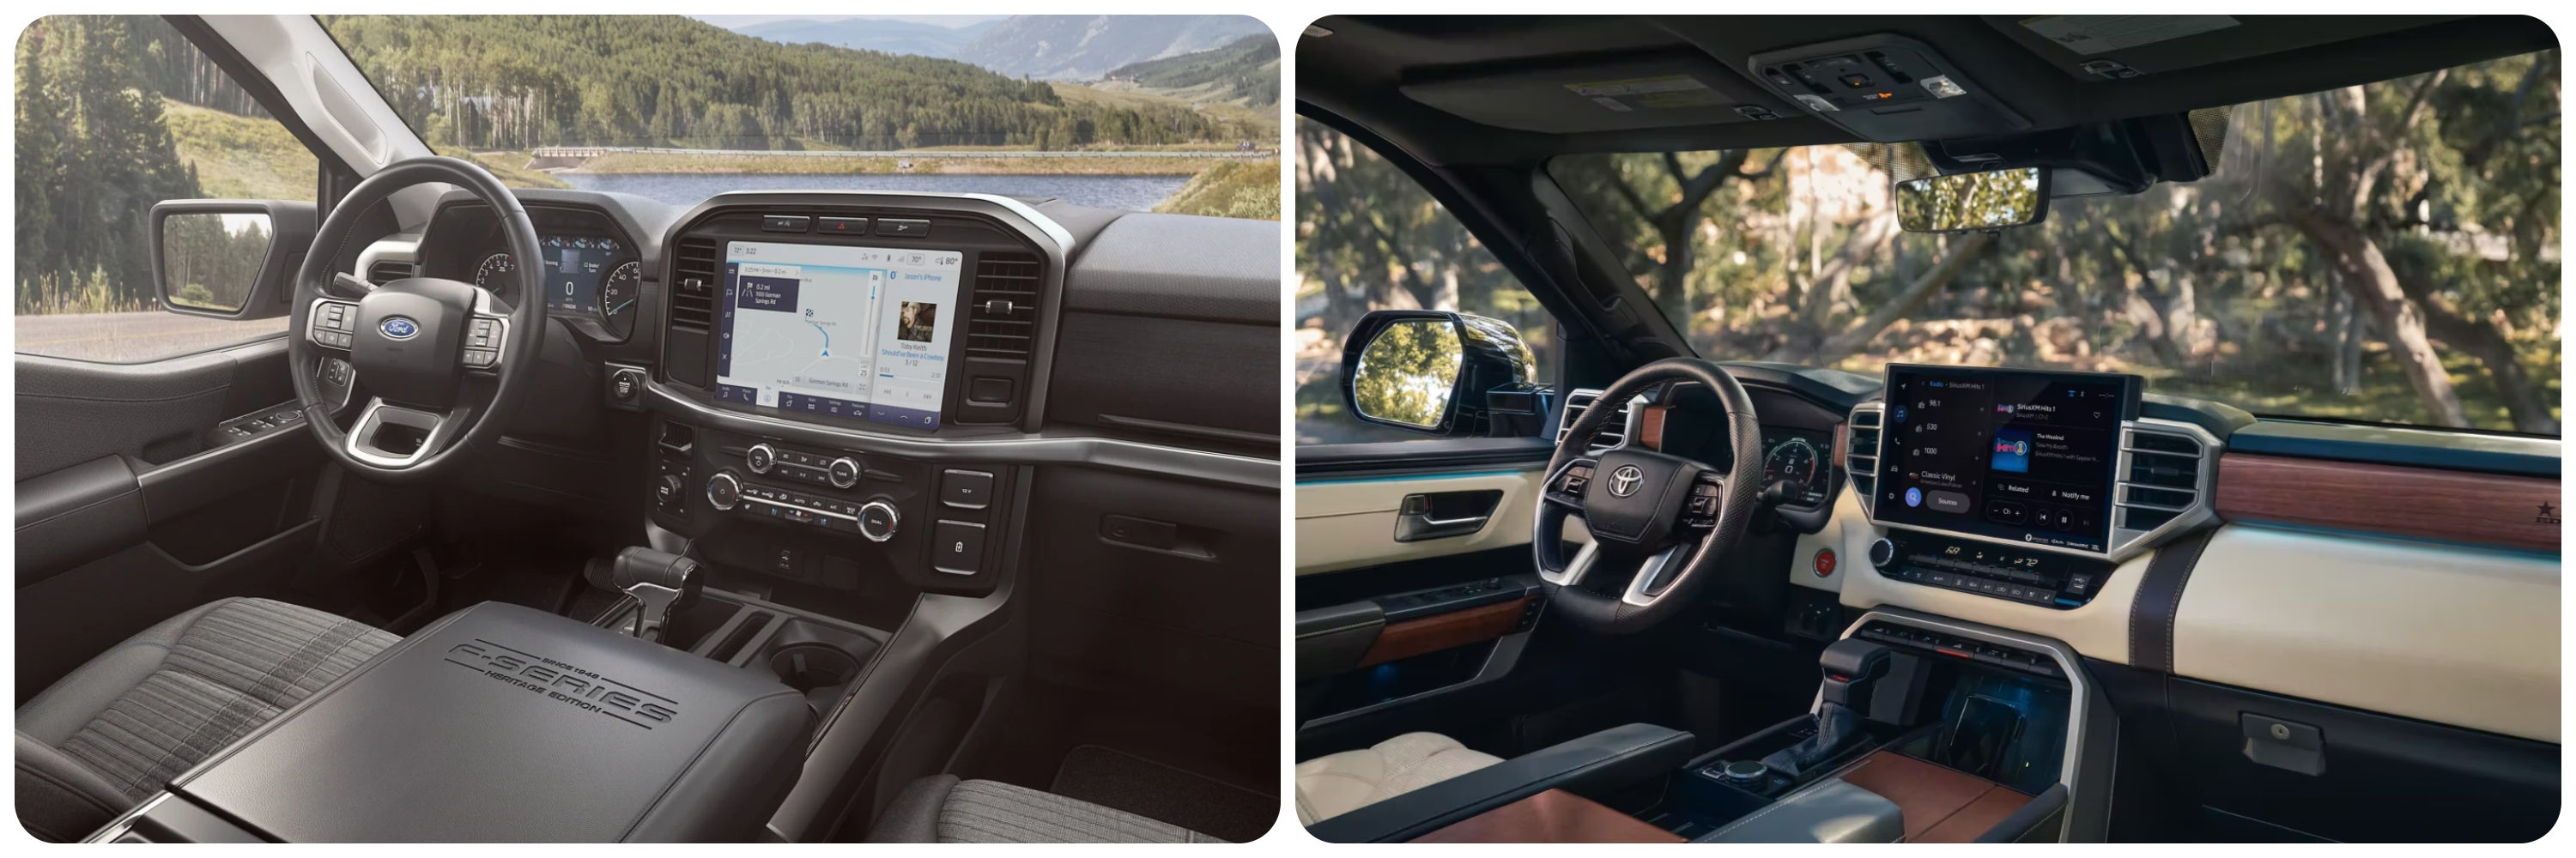 A view of the infotainment systems and dash of the 2023 Ford F-150 on the left and the 2023 Toyota Tundra on the rightthe